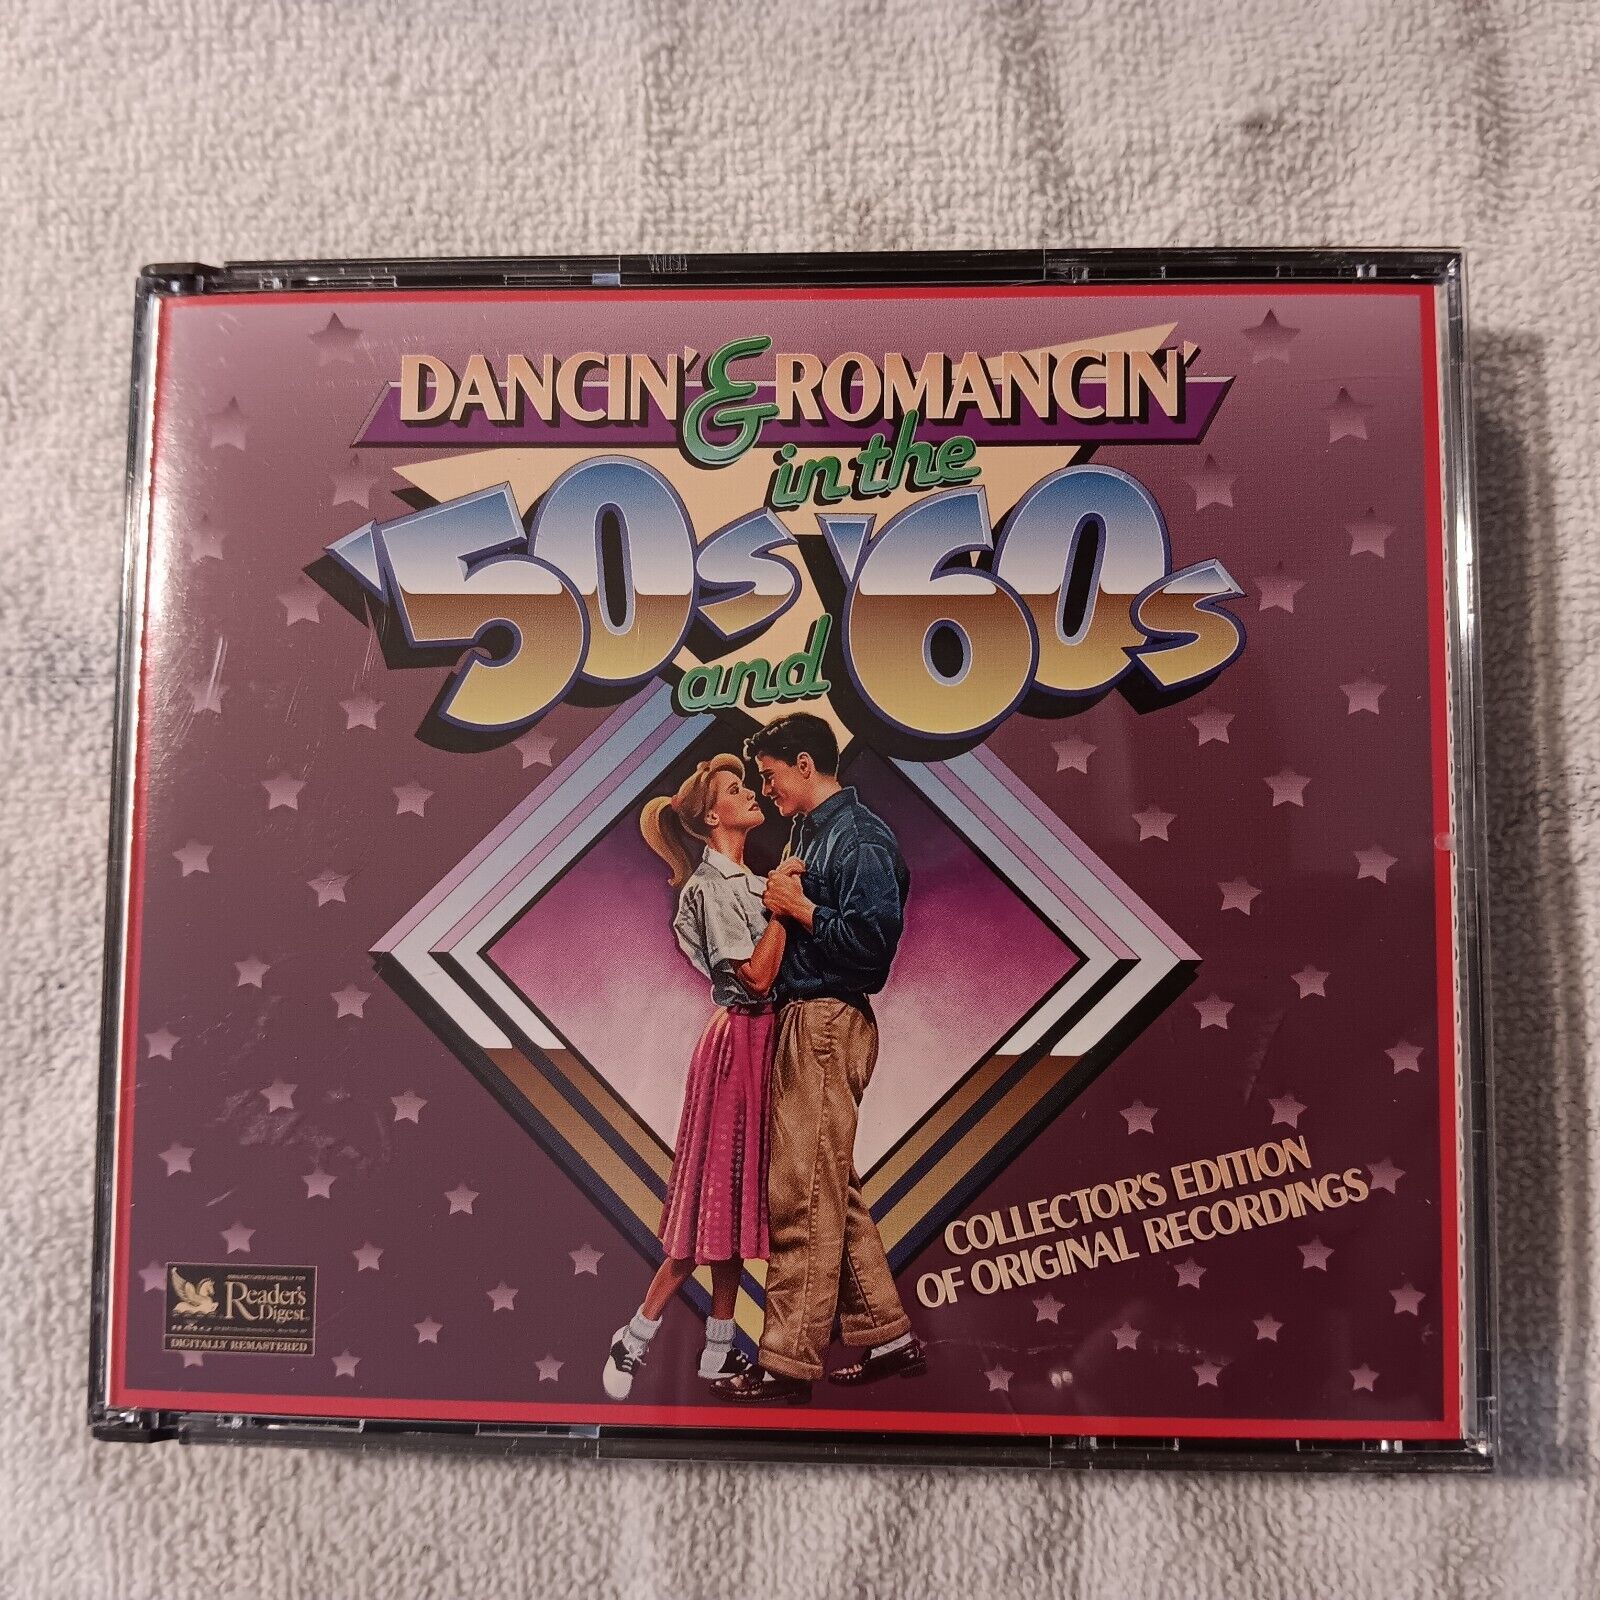 Dancin’ & Romancin’ in the 50s and 60s Readers Digest 3 CD Set